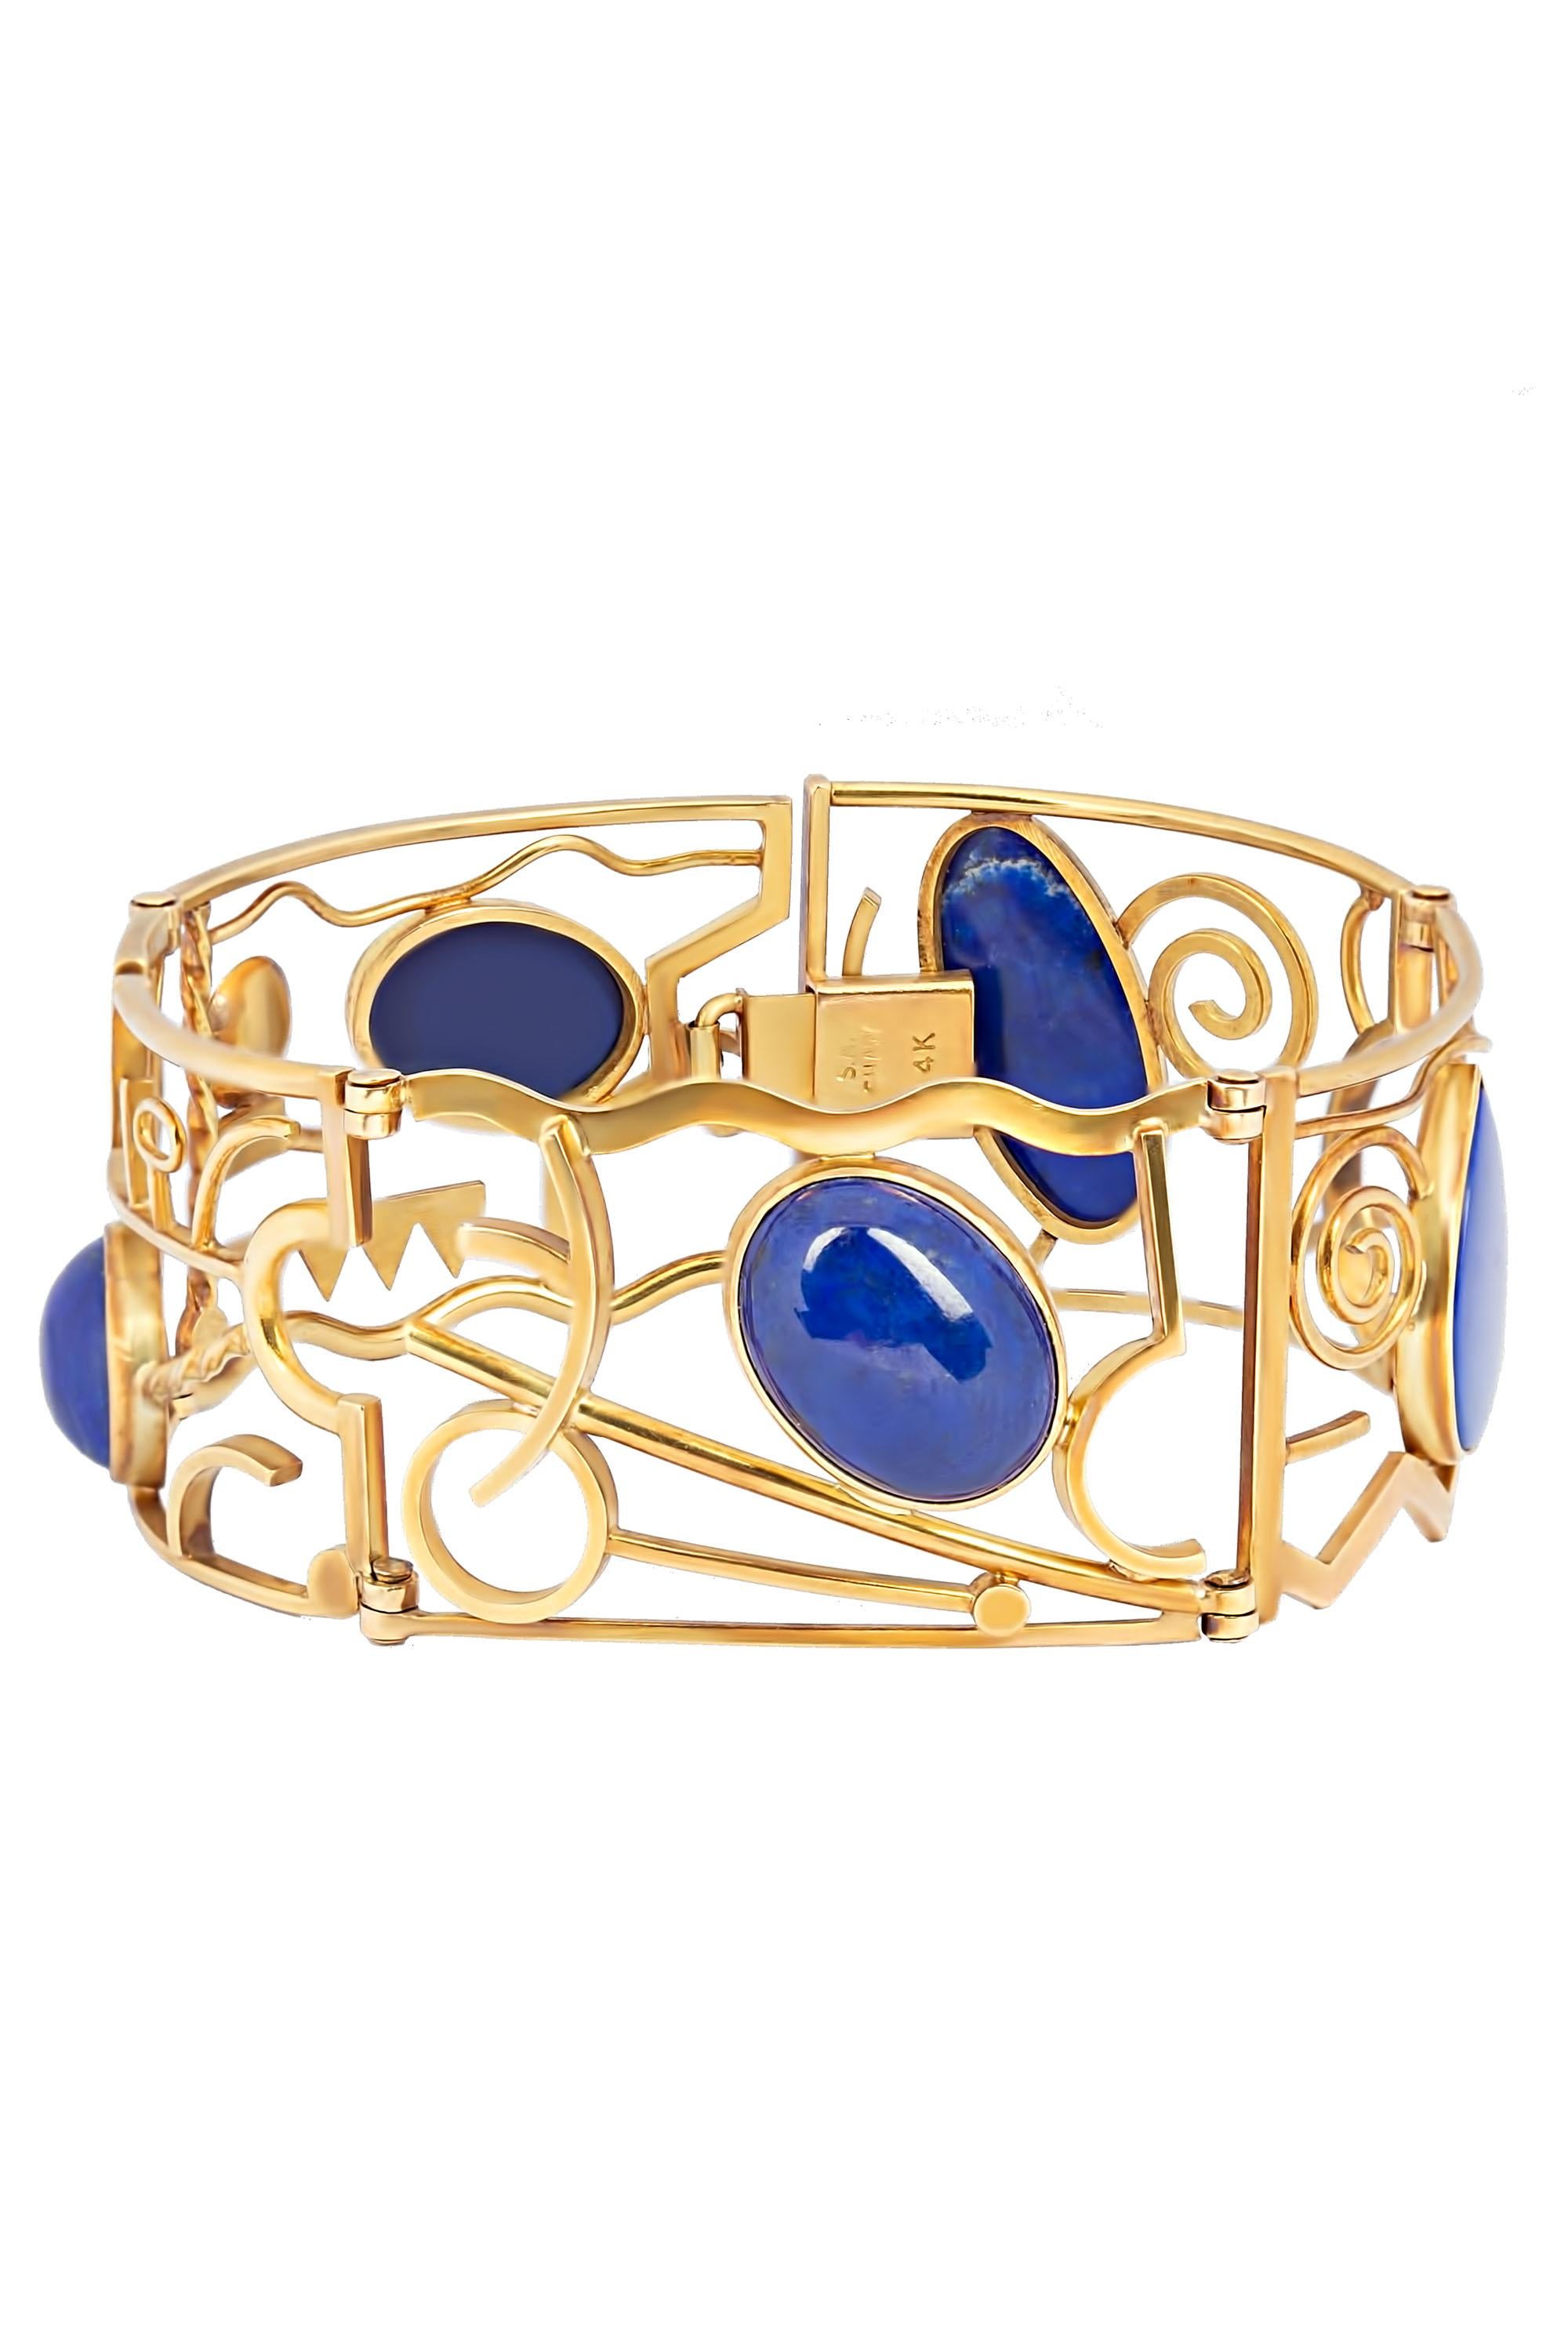 Modern Vintage 14 Karat Yellow Gold Abstract Lapis Lazuli Bracelet by S.A Shaw For Sale